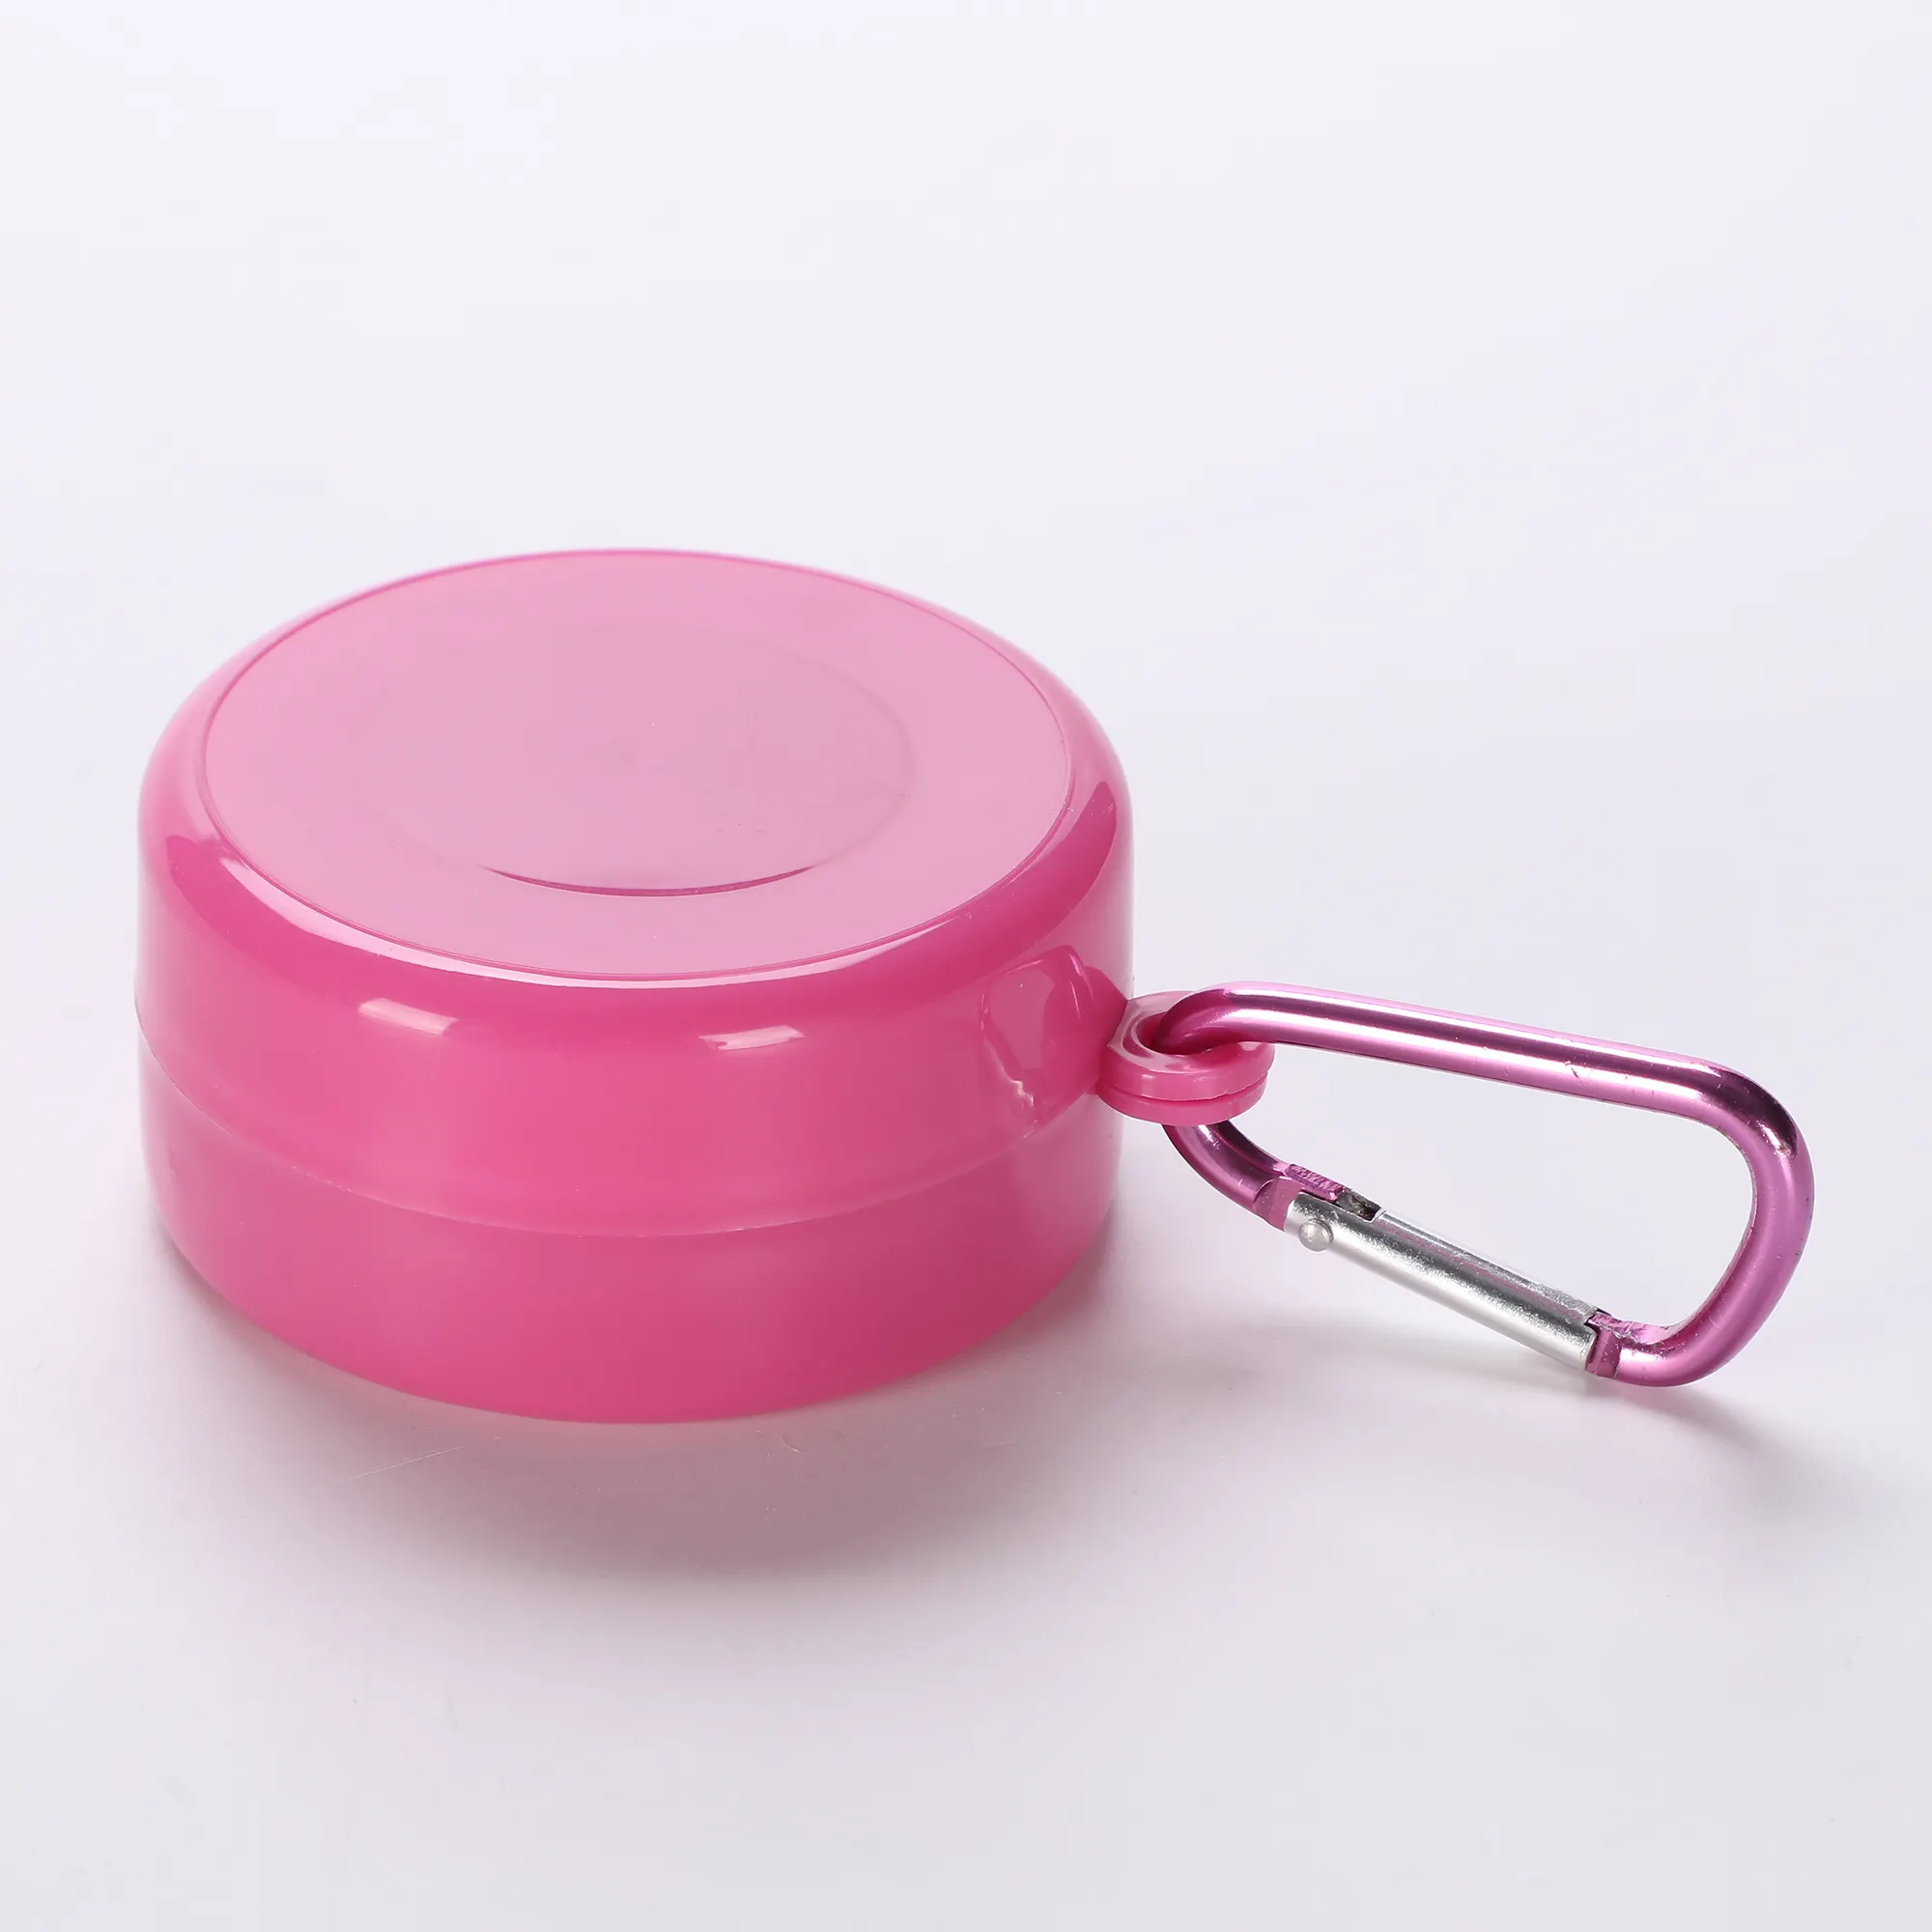 Plastic 200ML 6.7 OZ Telescopic Retractable Collapsible Folding Foldable Reusable Outdoor Camping Travel Cup With Pill Box